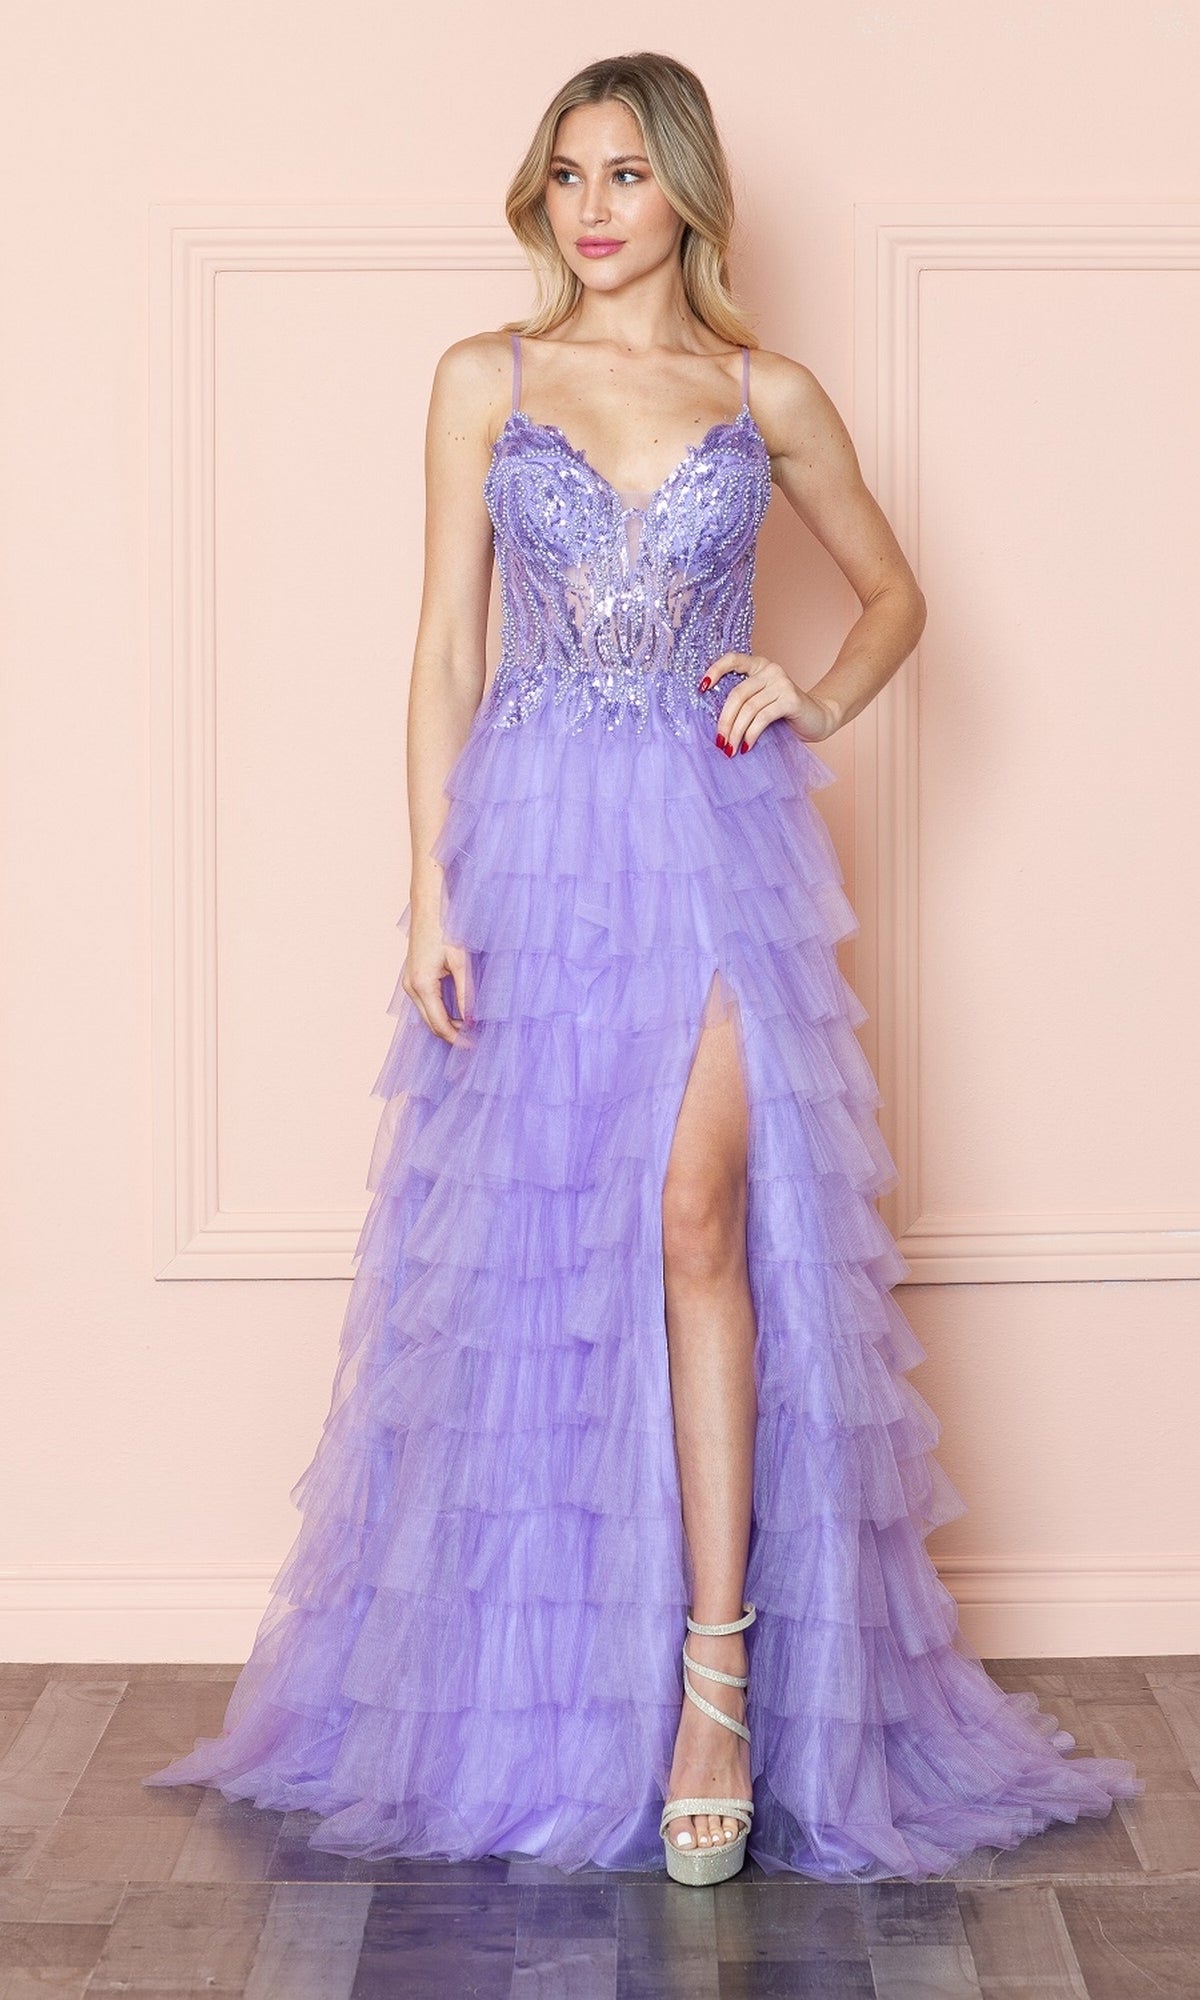 Long Prom Dress 9408 by Poly USA